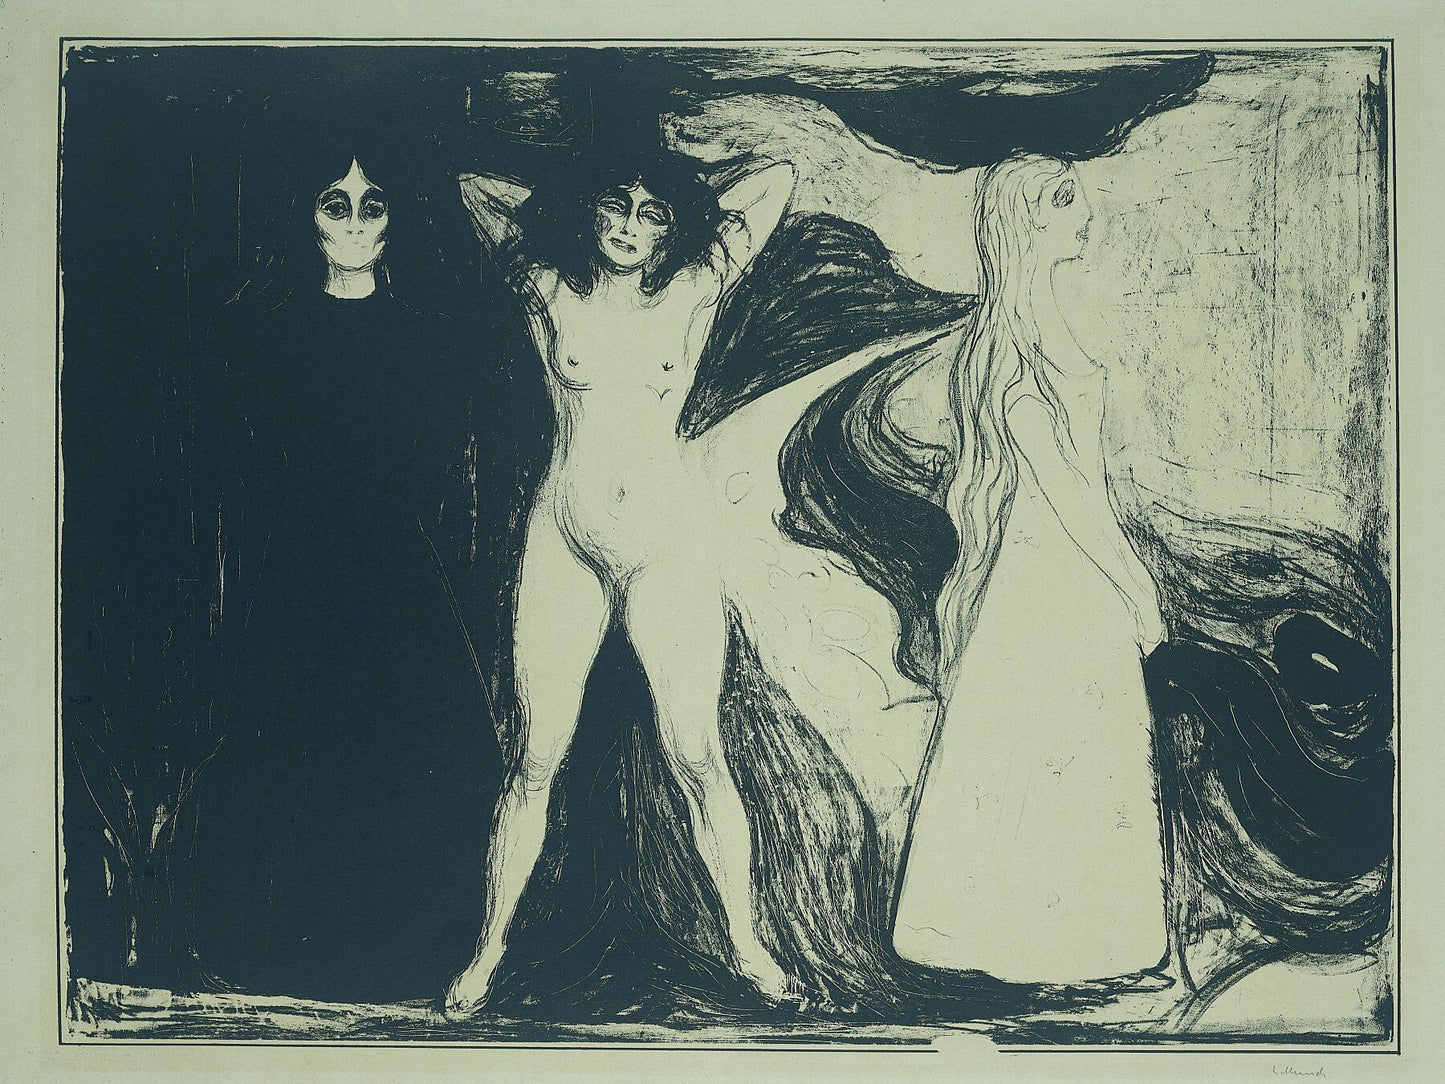 Women in Three Stages by Edvard Munch - c 1894